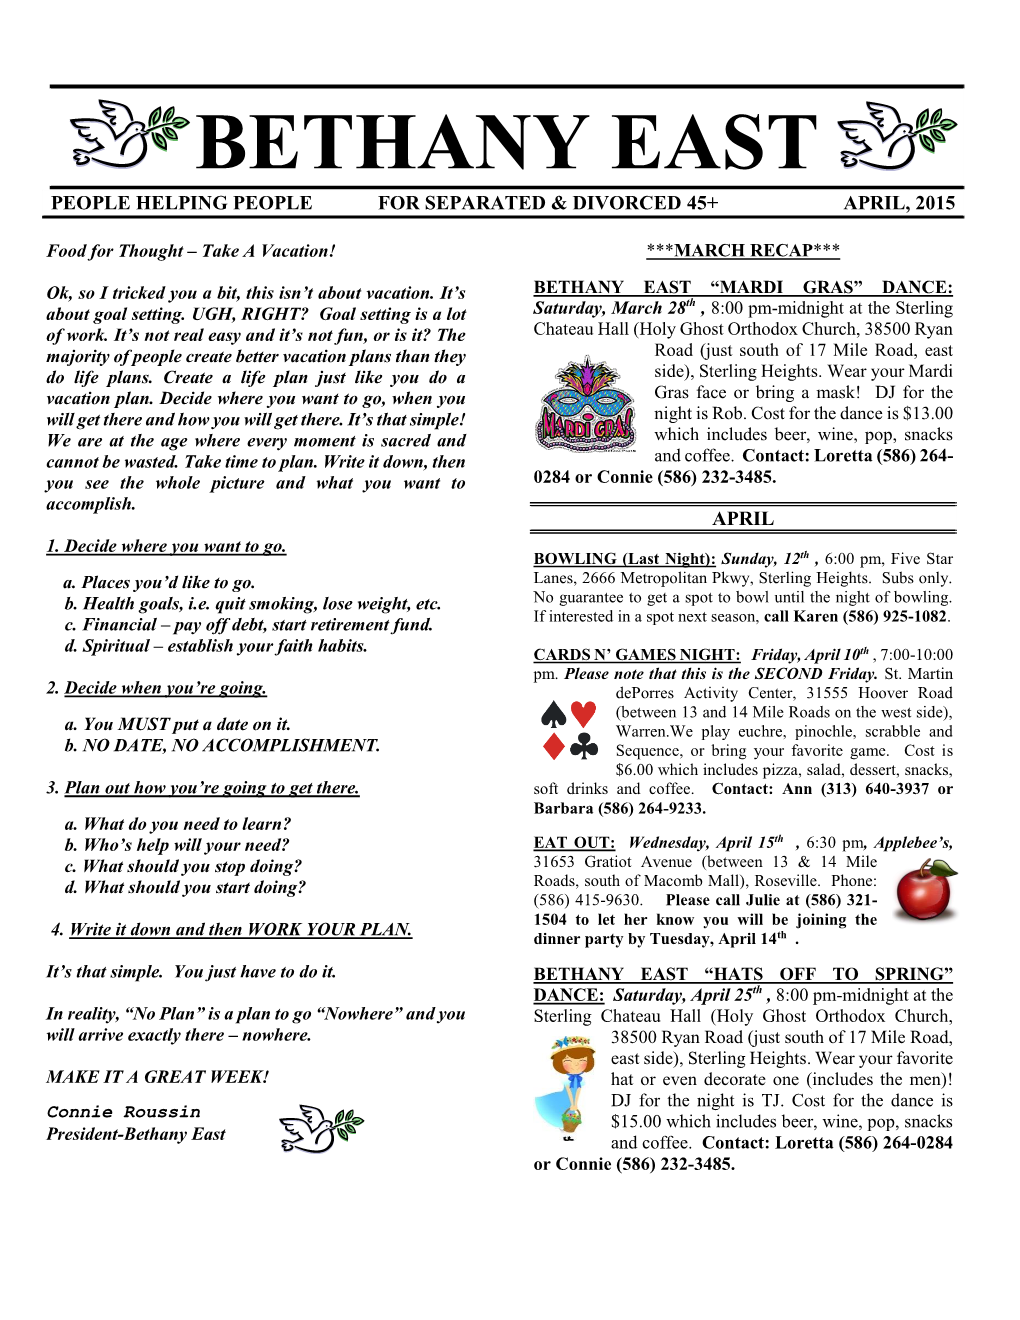 Bethany East People Helping People for Separated & Divorced 45+ April, 2015